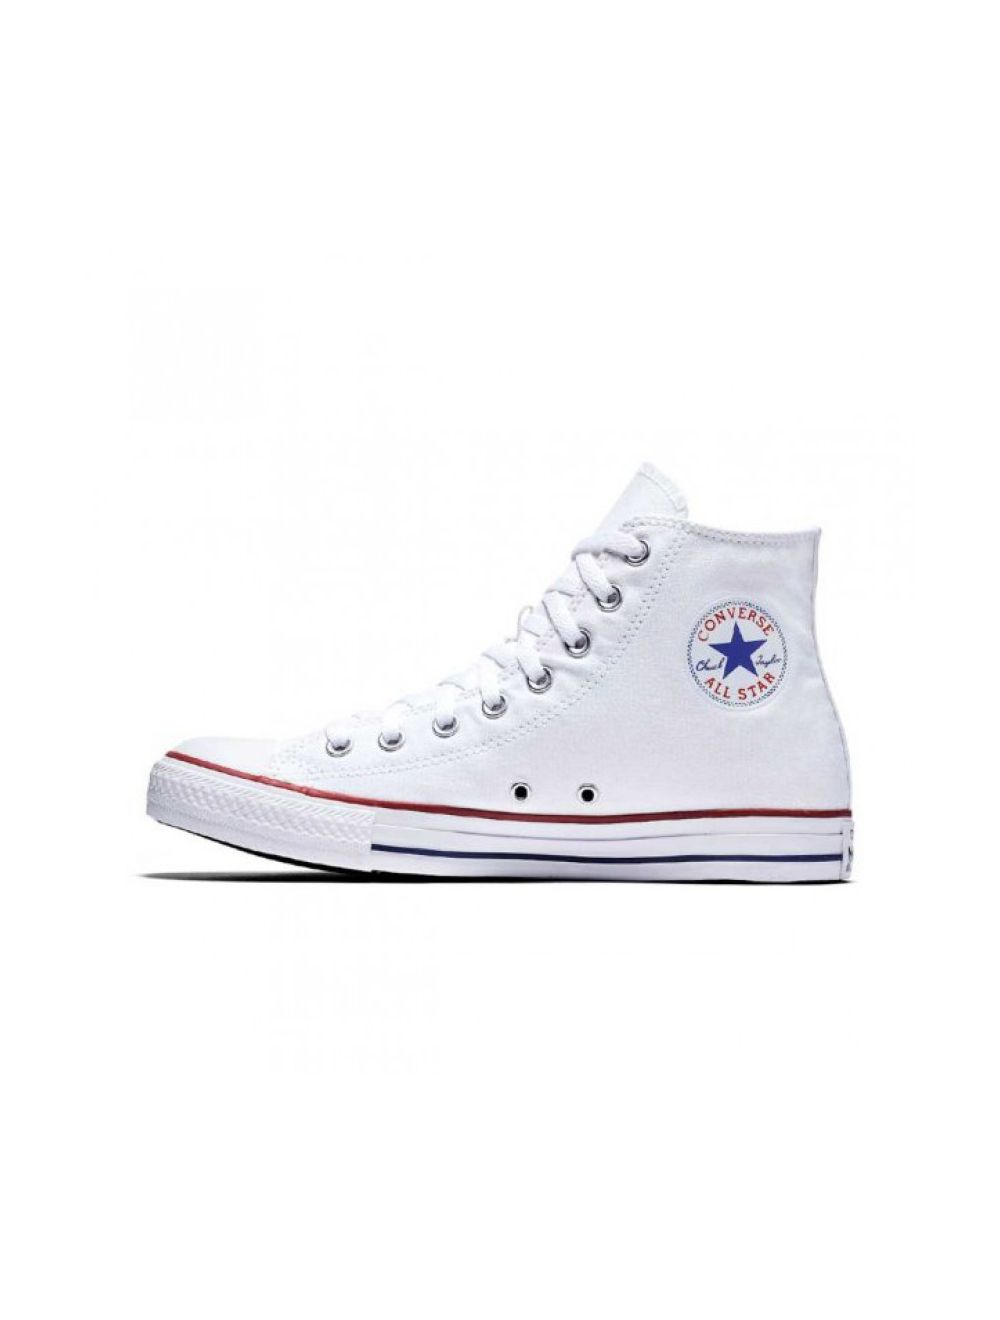 Buy Converse All Star Chuck Taylor Canvas Hi Youth White | Studio 88